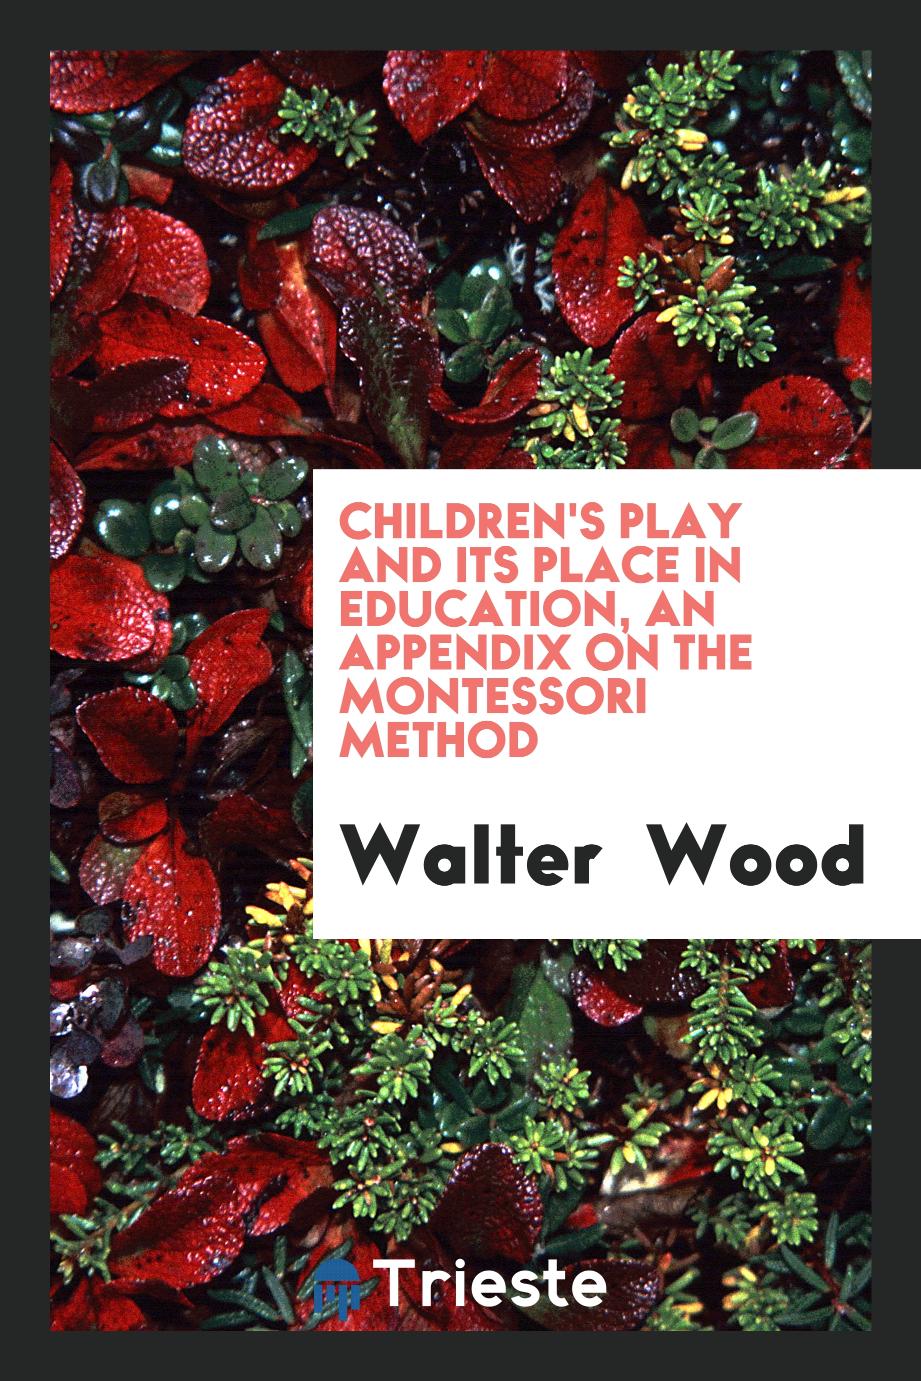 Children's play and its place in education, an appendix on the Montessori method